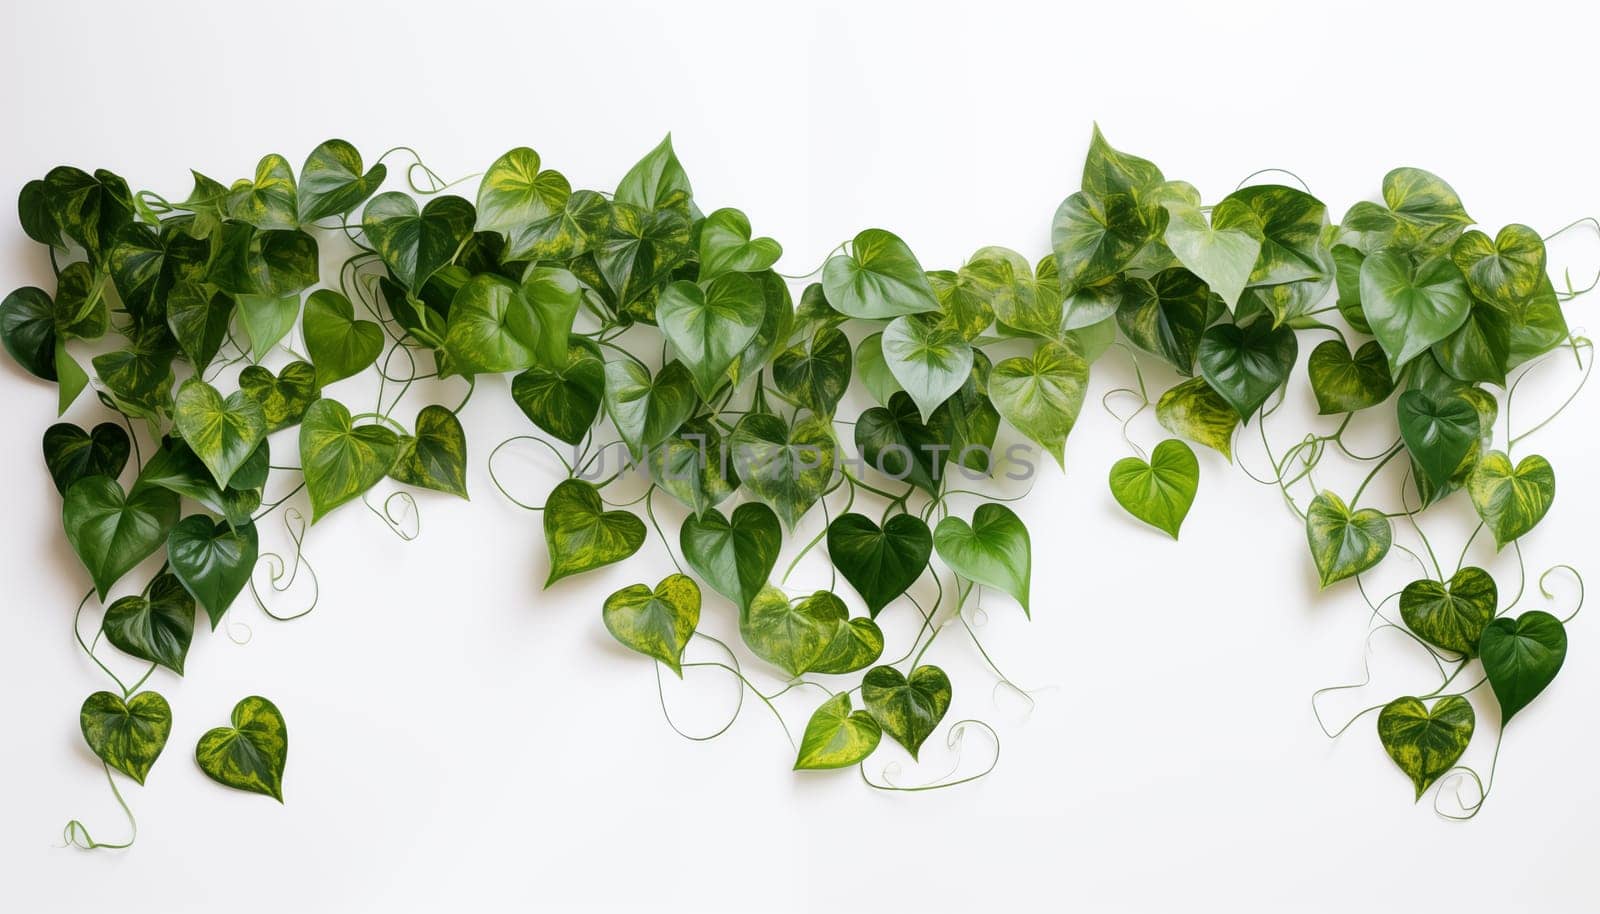 lush Pothos plants with cascading vines by Nadtochiy